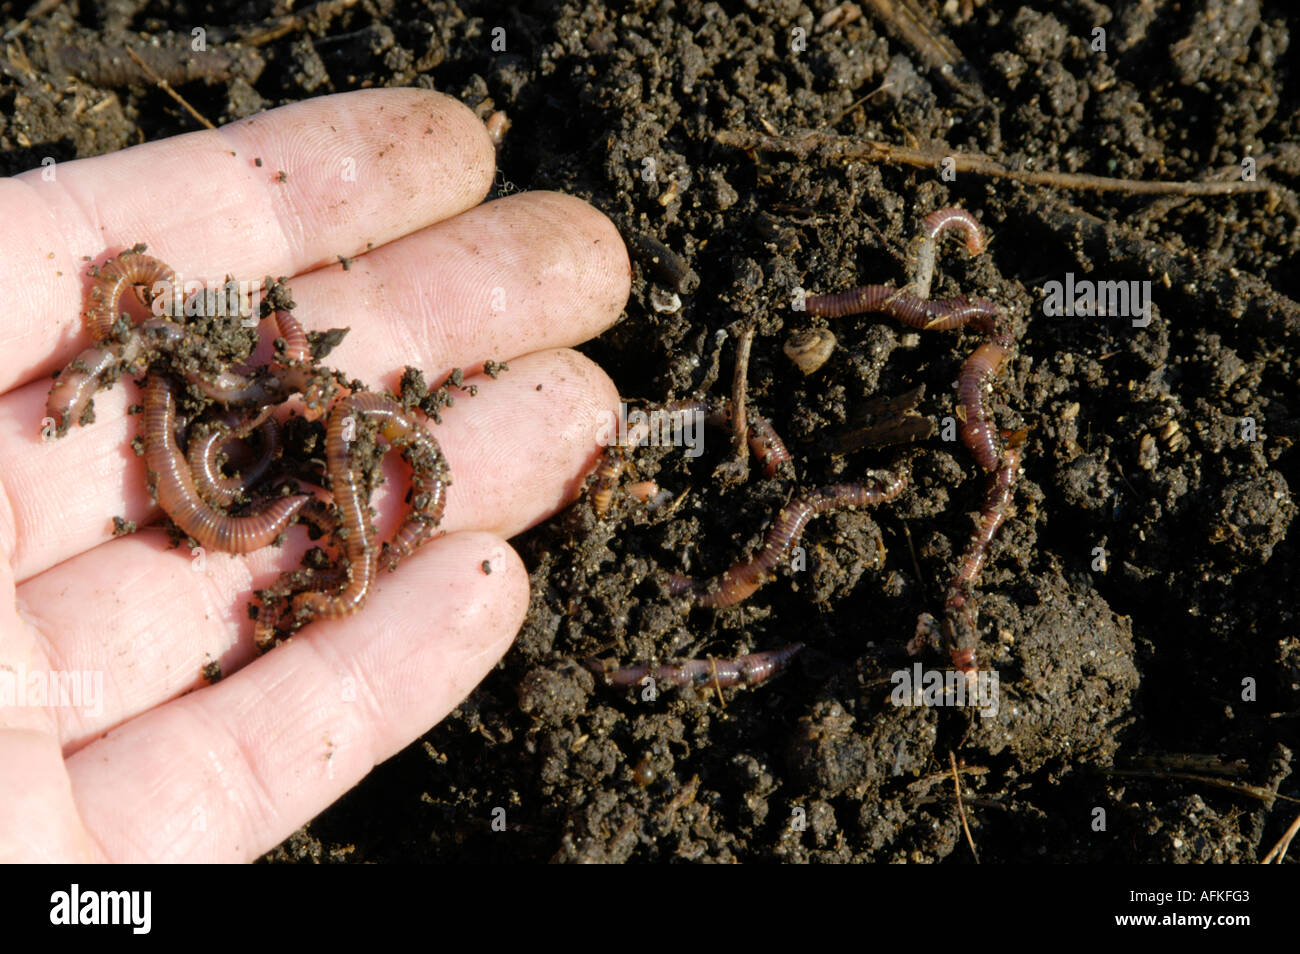 Tiger Worms In Garden Compost On Hand Stock Photo 7982658 Alamy